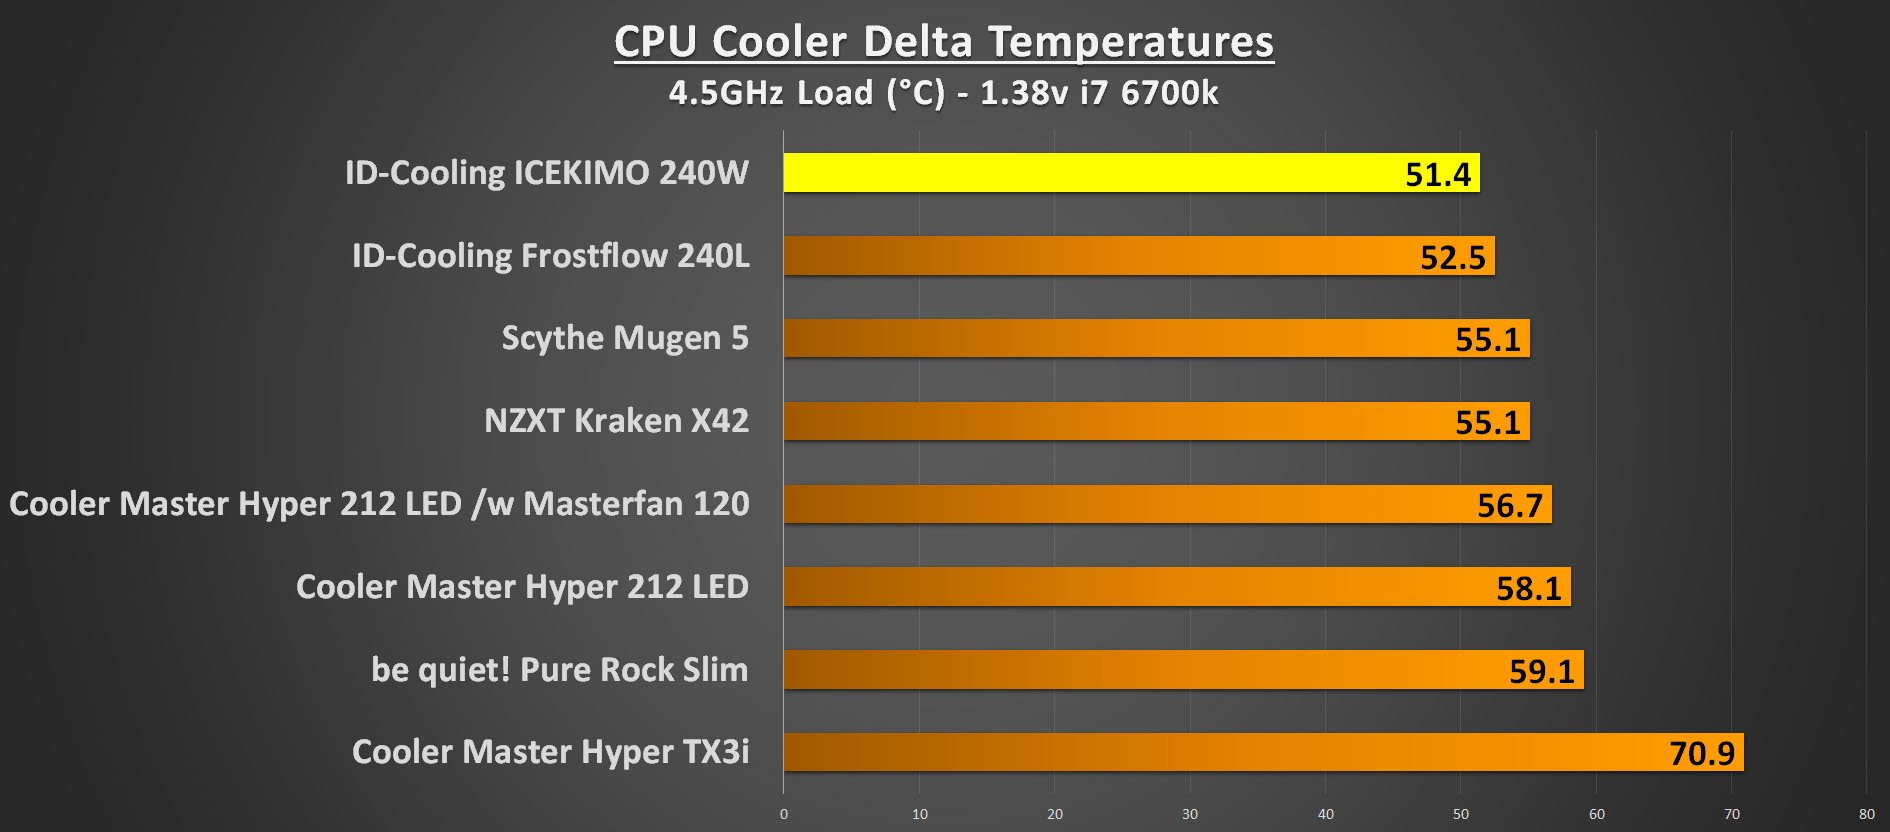 ID-Cooling ICEKIMO 240W Performance 4.5GHz Load